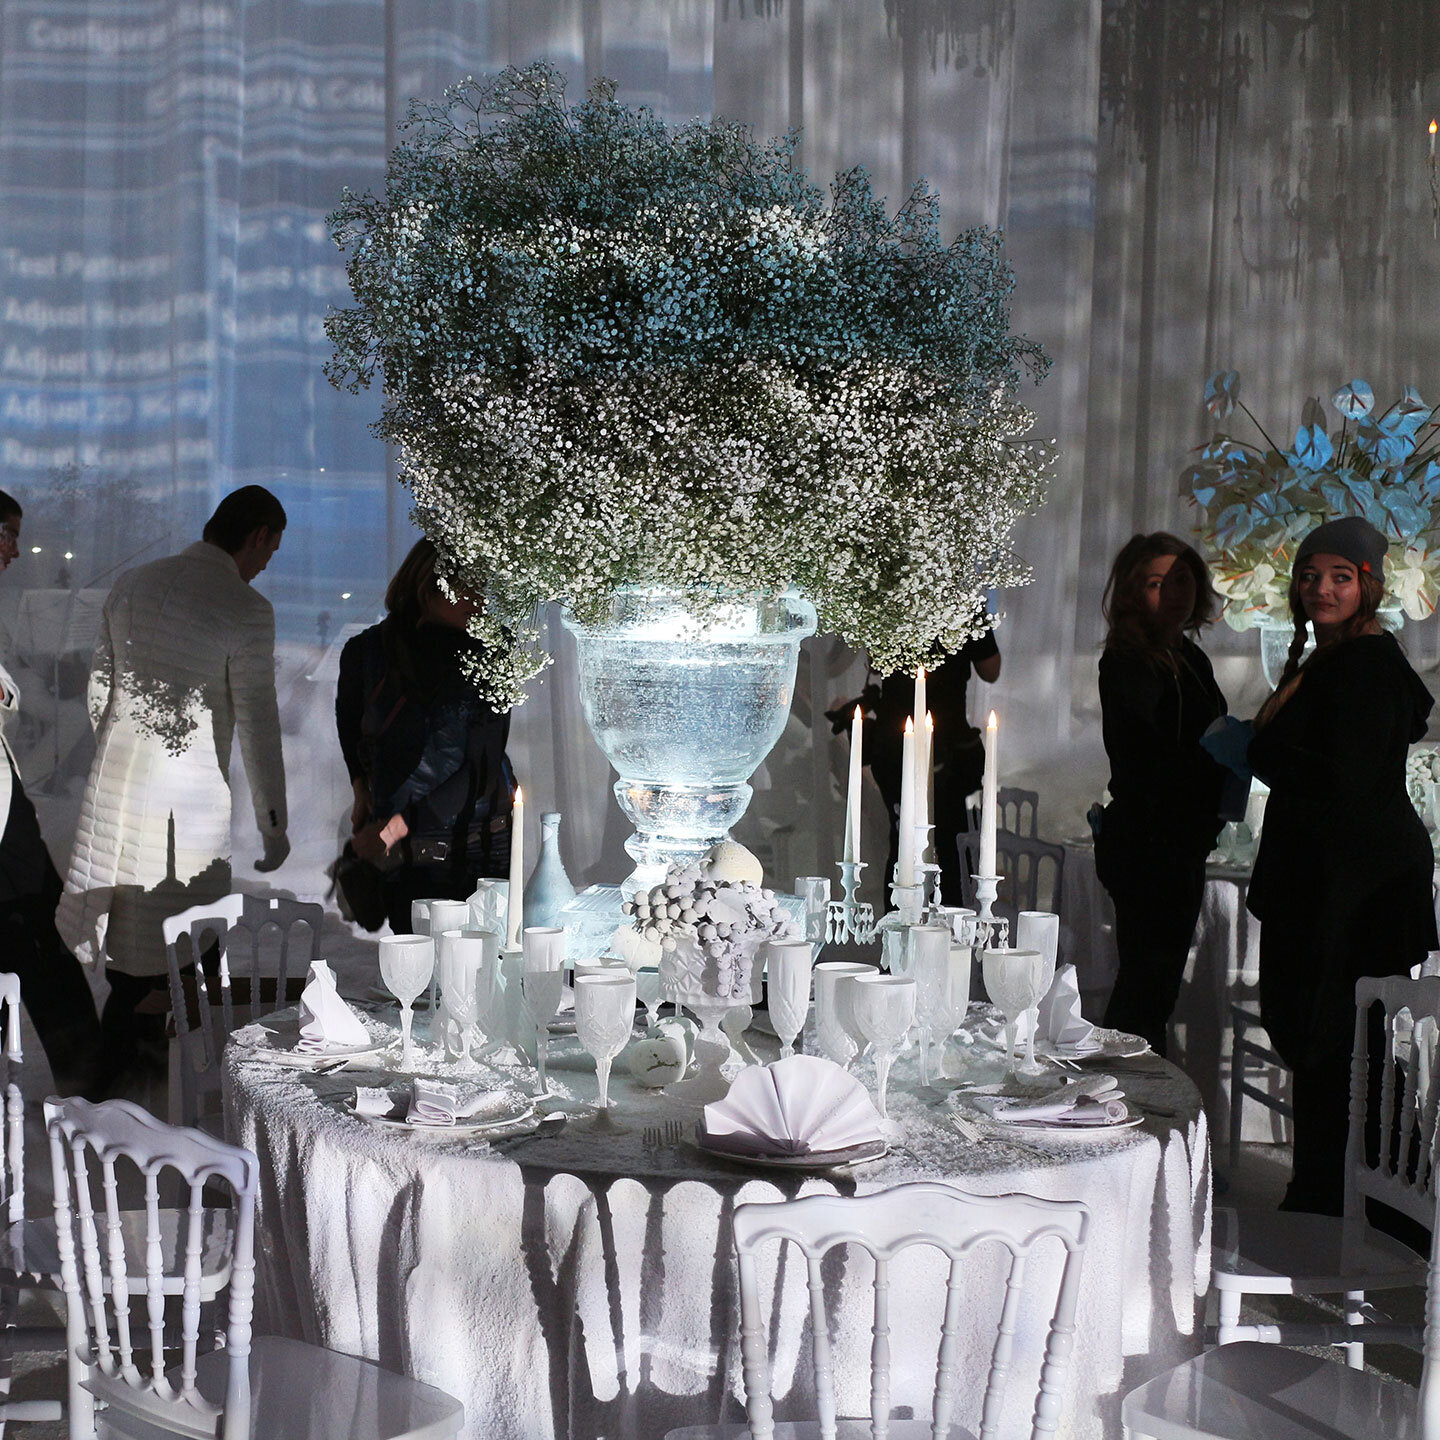 Elegant ice sculptures used as decor in a winter wedding